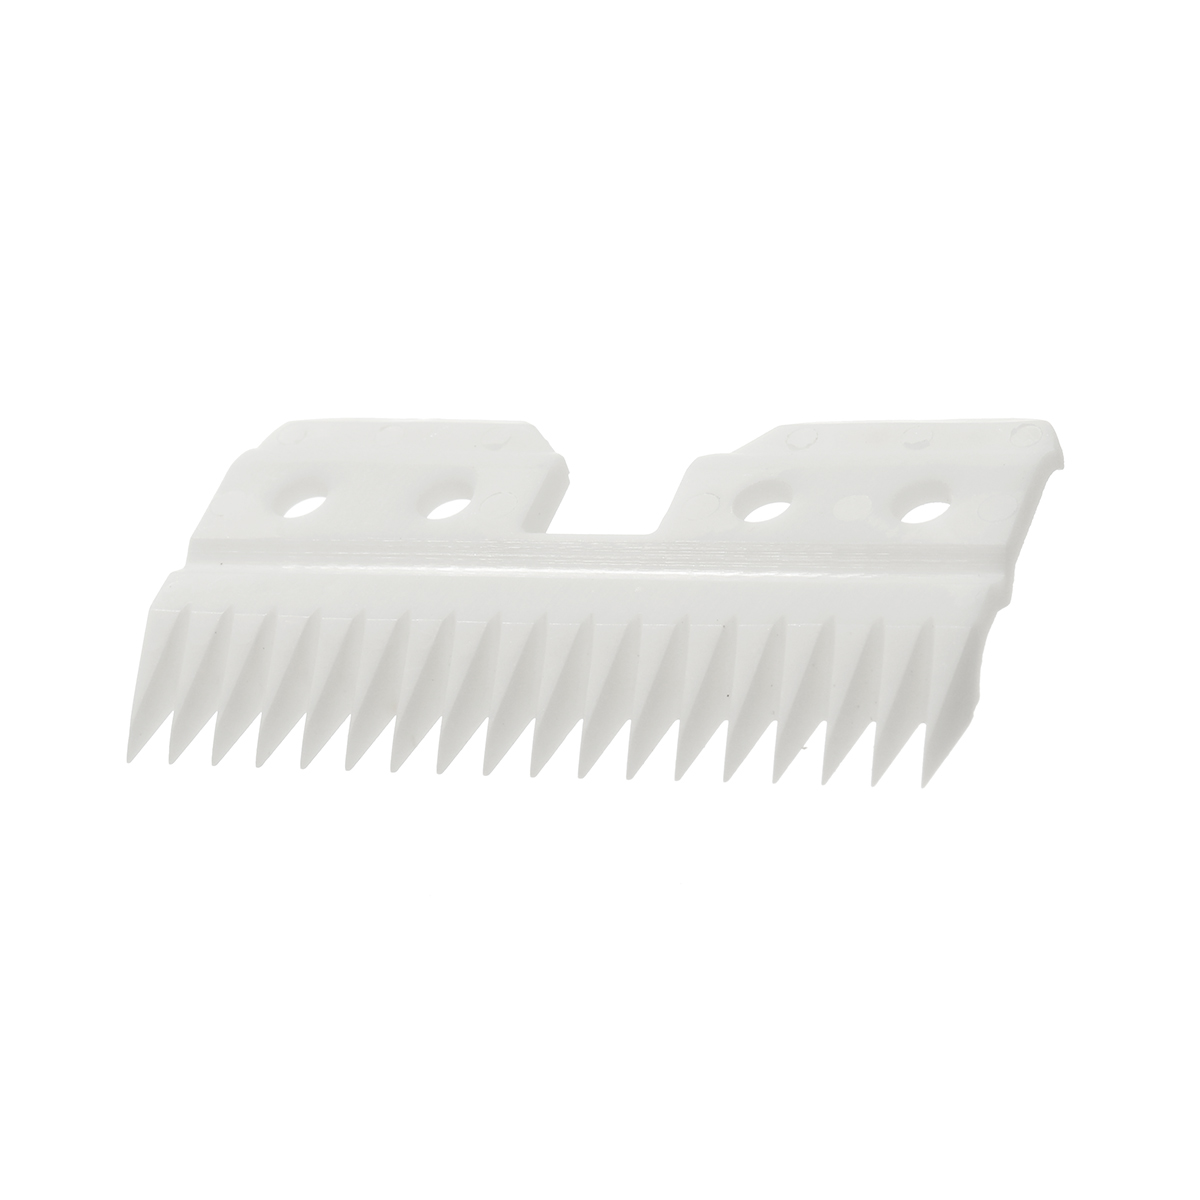 1x18-Teeth-Ceramic-Blade-Replacement-Accessories-For-OSTER-A5-Series-Clipper-Blades-Cutter-1561061-7